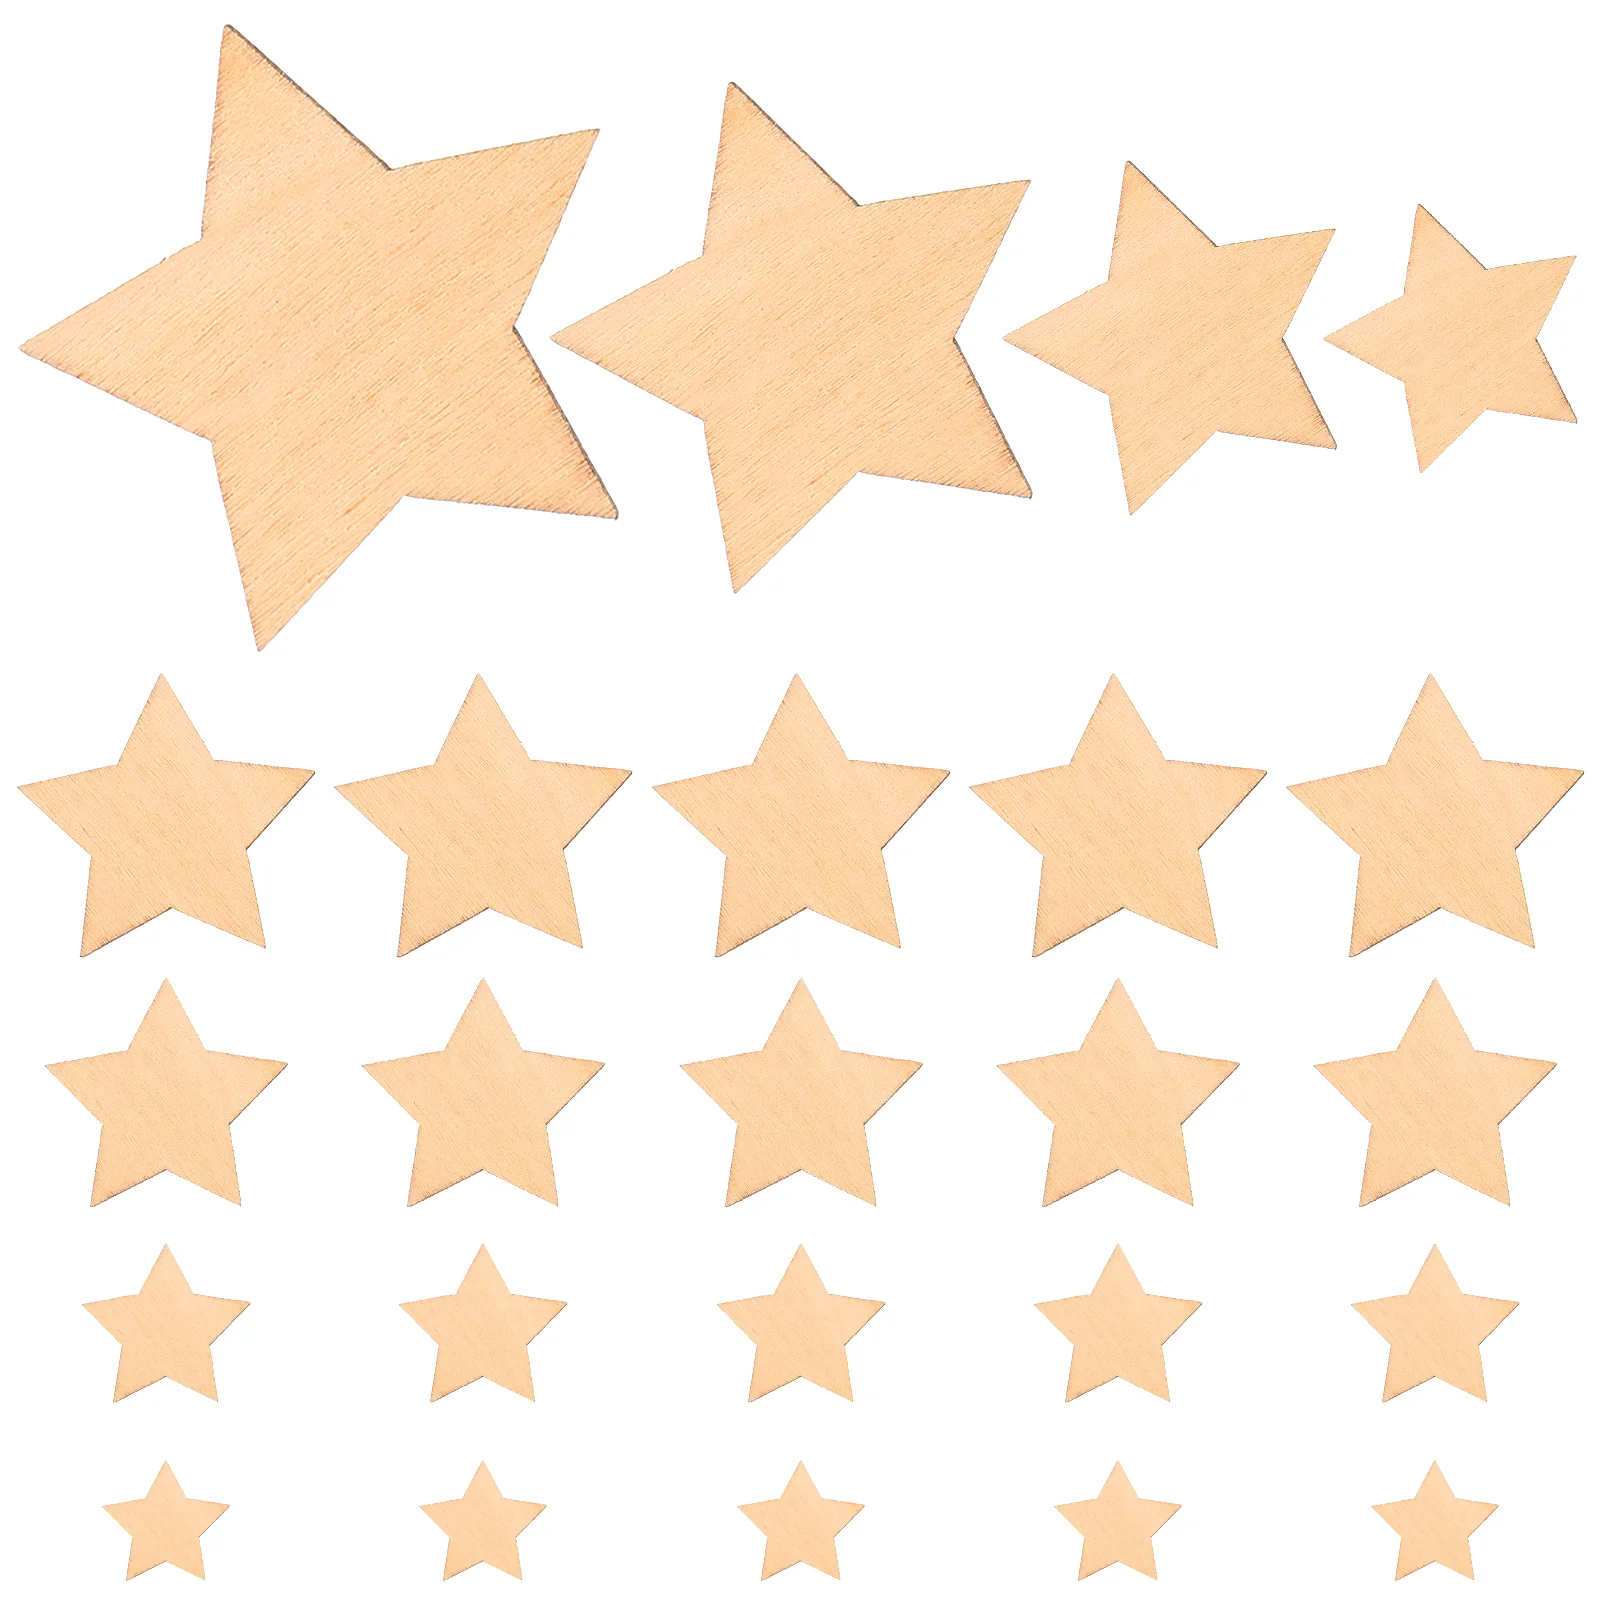 

Wooden Wood Star Cutouts Craft Ornaments Unfinished Pieces Crafts Embellishments Decorations Christmas Shapes Shape Stars Blank